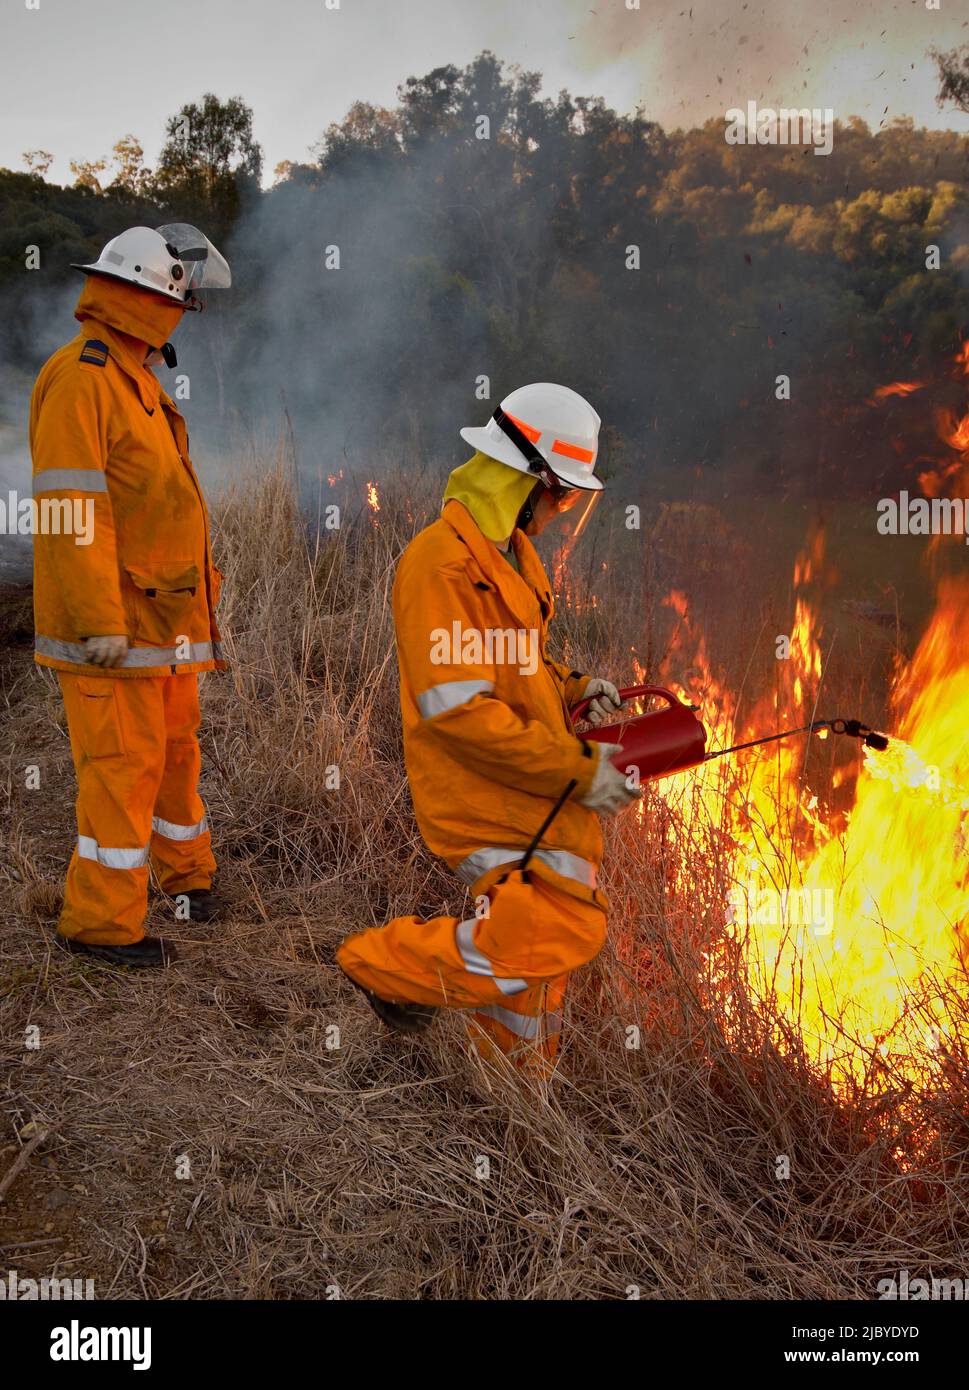 Firemen in protective clothing back burning forest floor Stock Photo